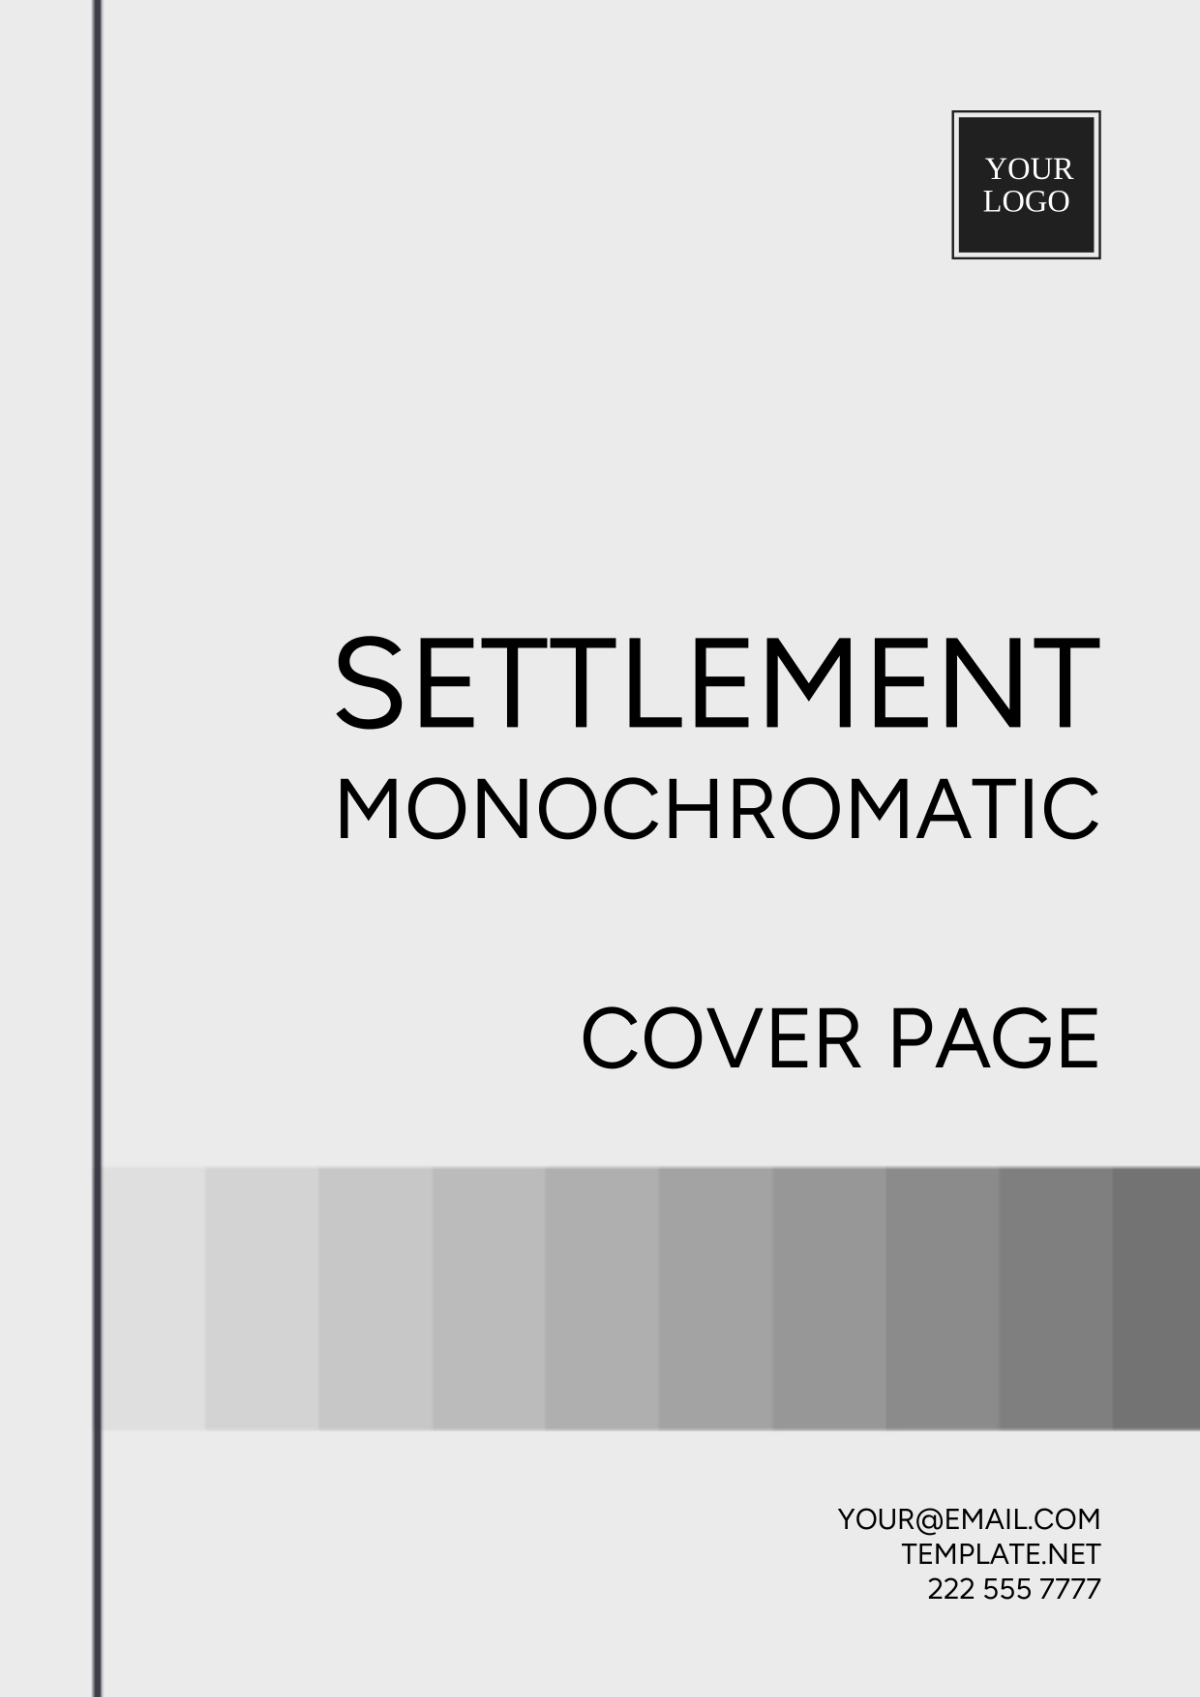 Settlement Monochromatic Cover Page Template